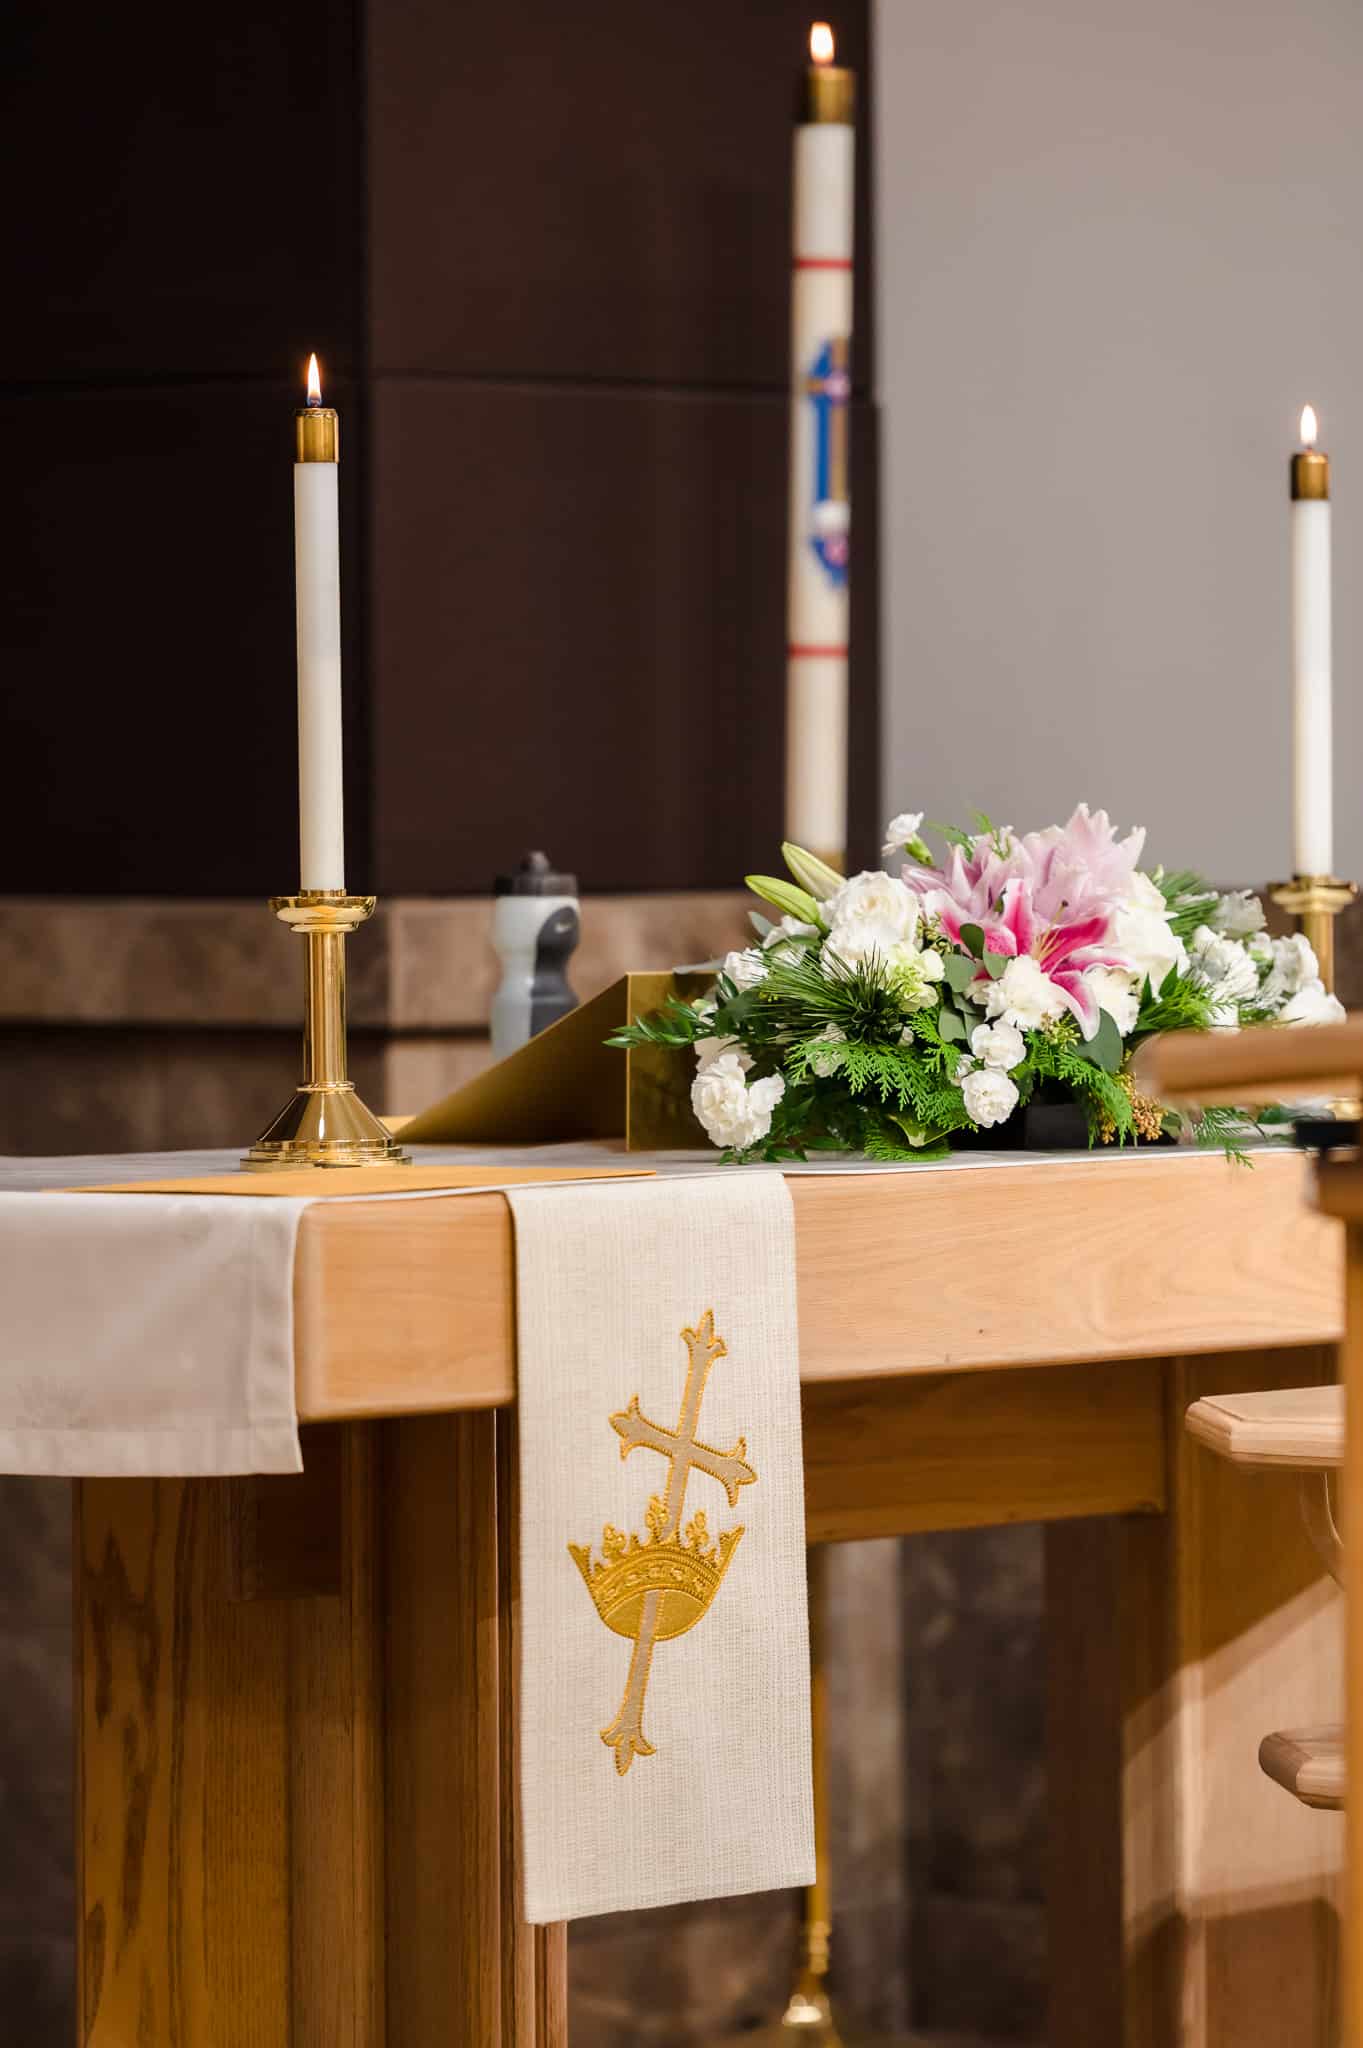 The altar of Risen Savior Lutheran church with a floral arrangement and burning candles.